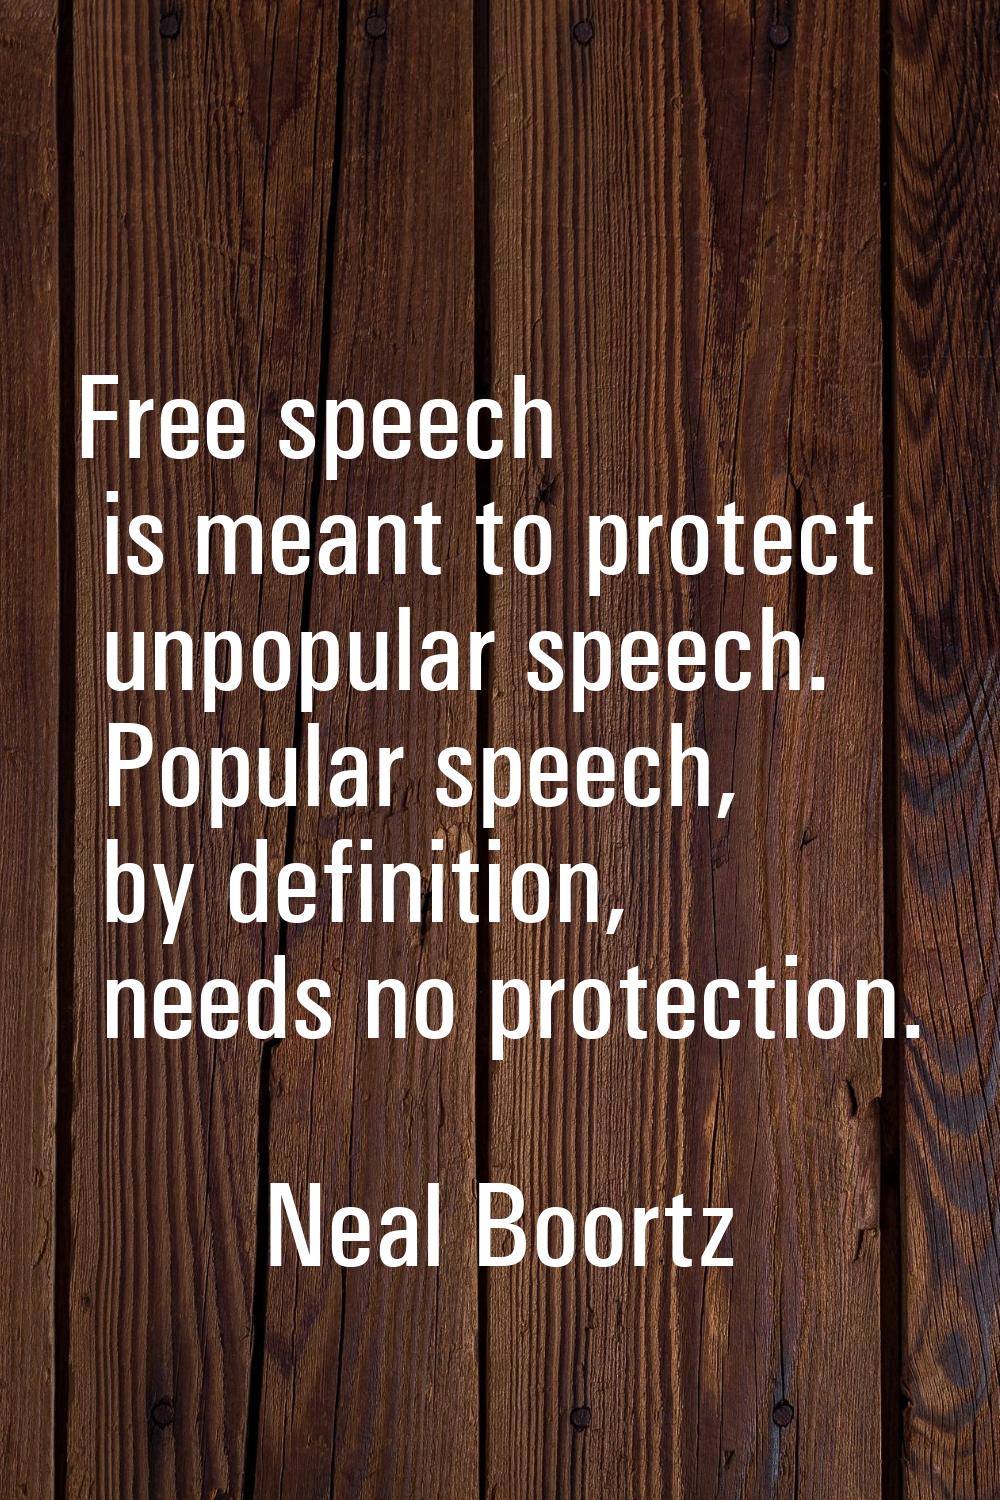 Free speech is meant to protect unpopular speech. Popular speech, by definition, needs no protectio